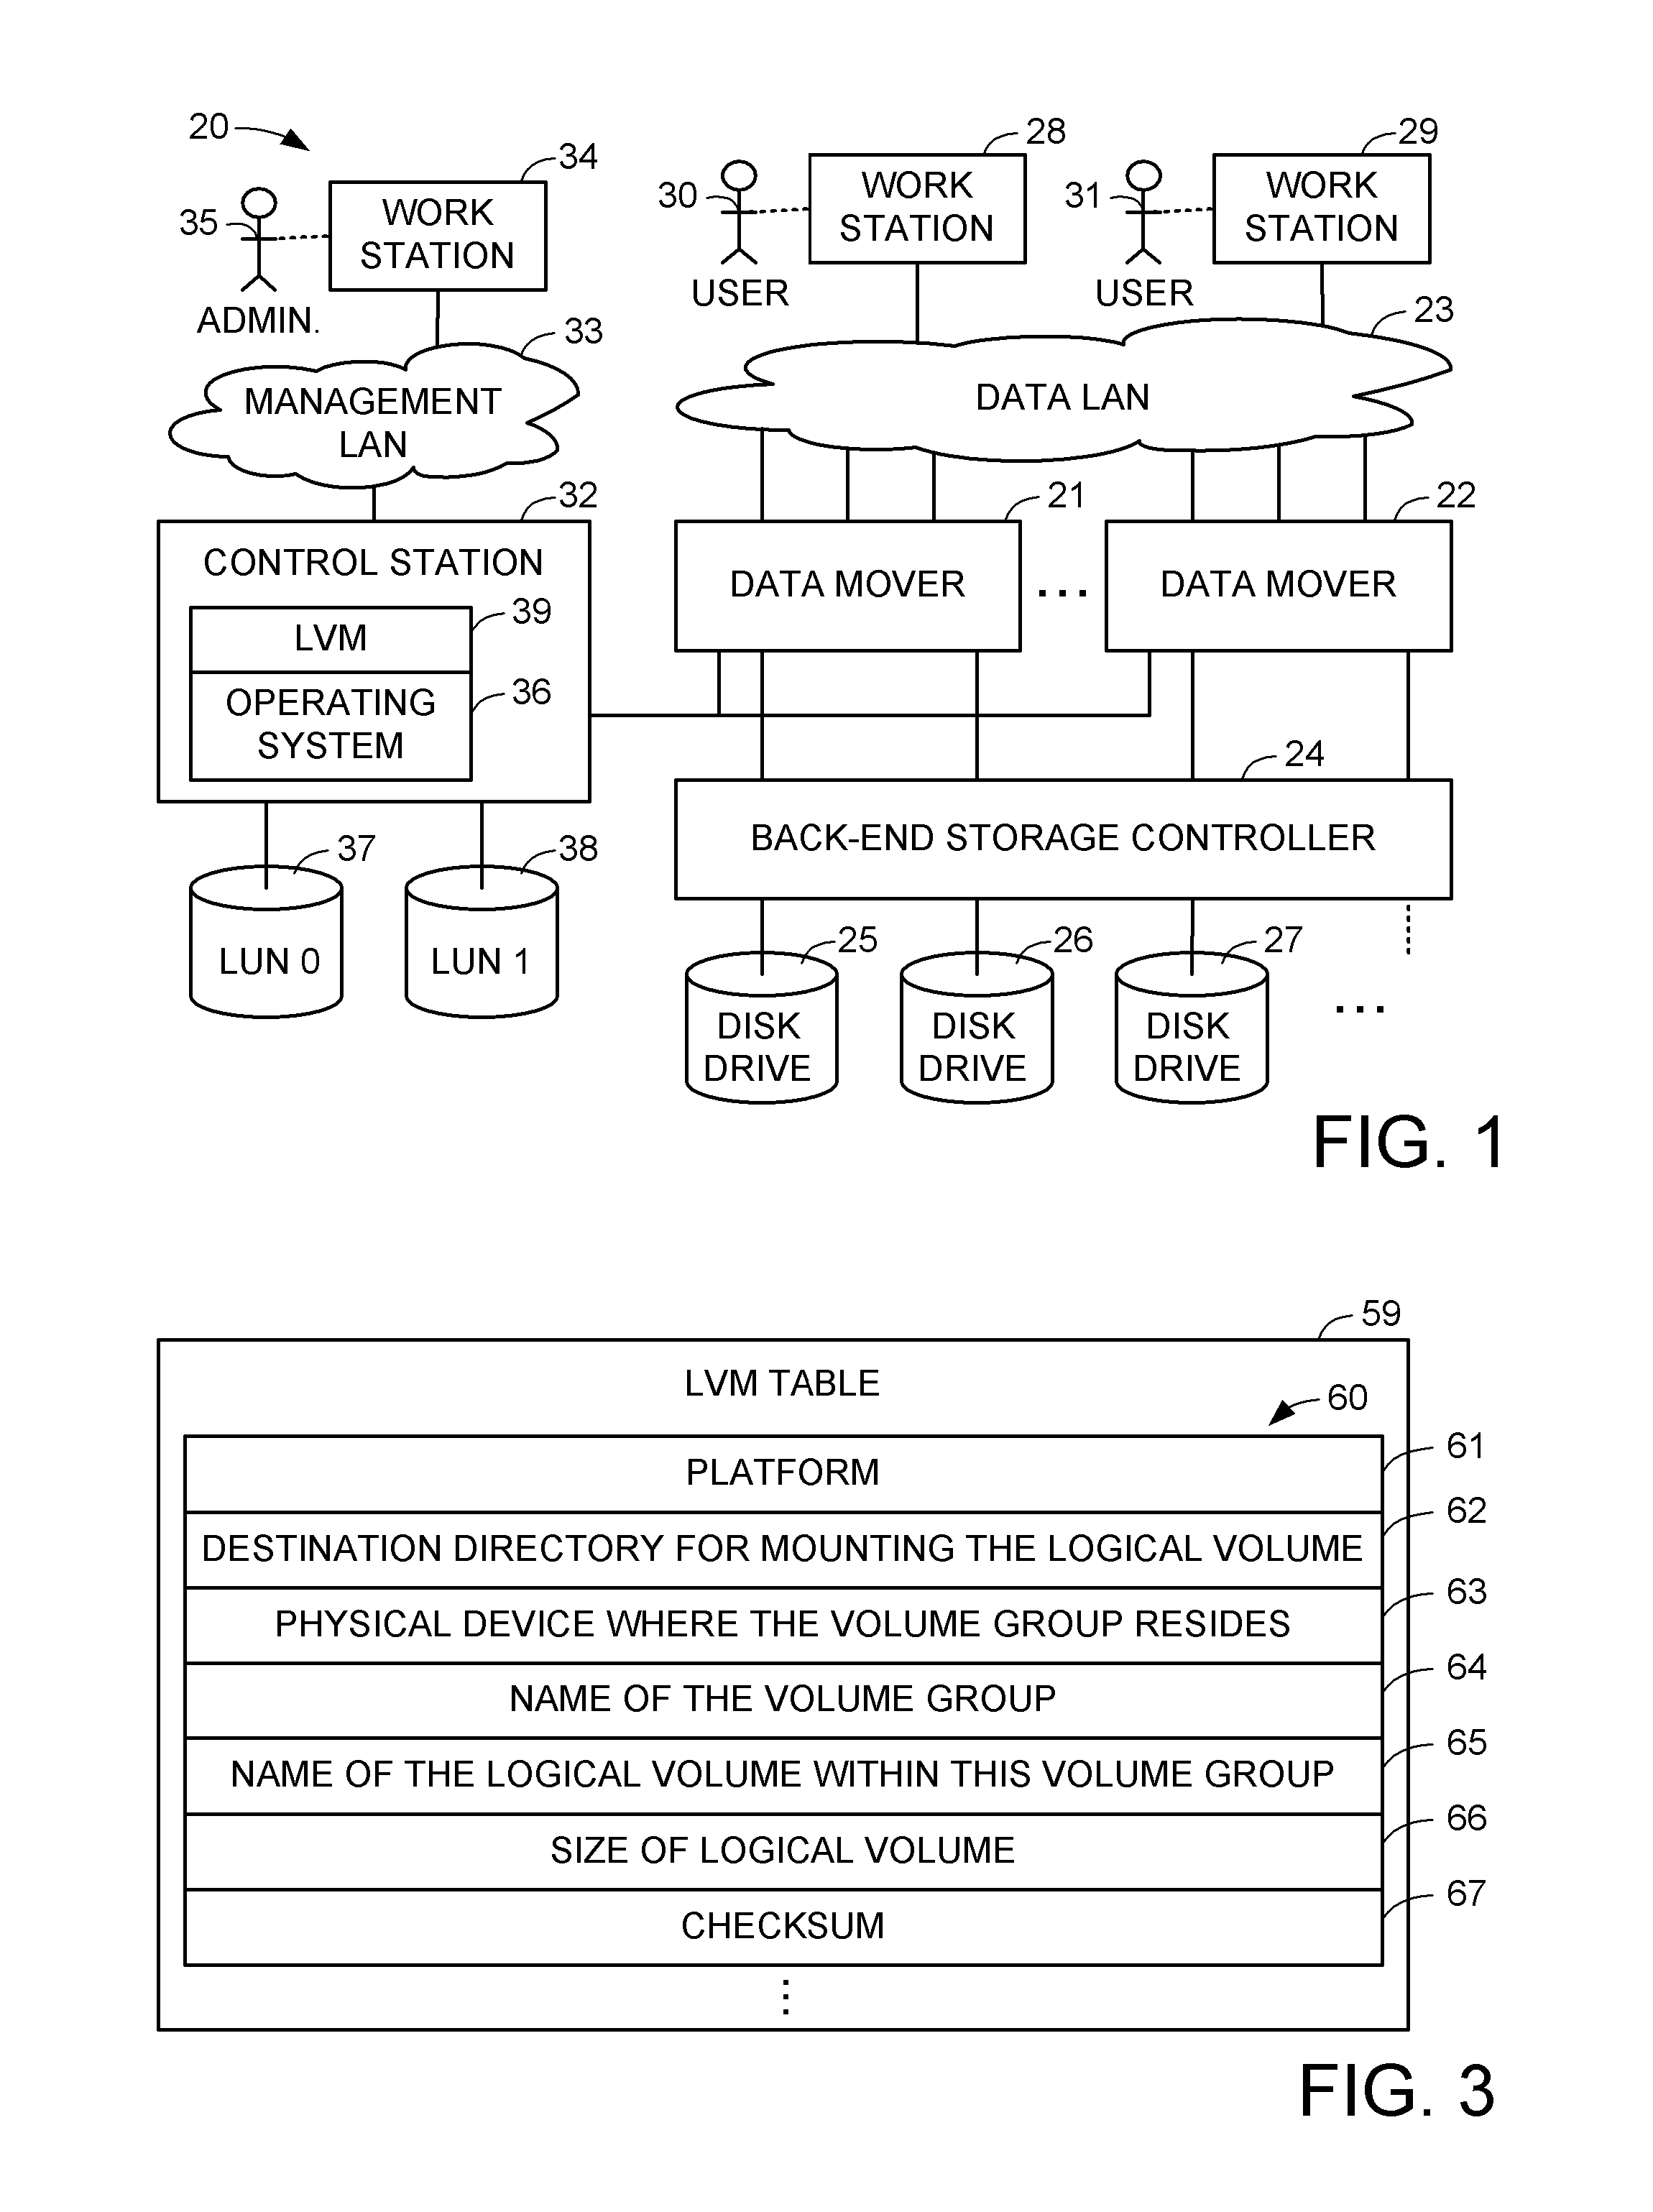 Error detection and recovery tool for logical volume management in a data storage system